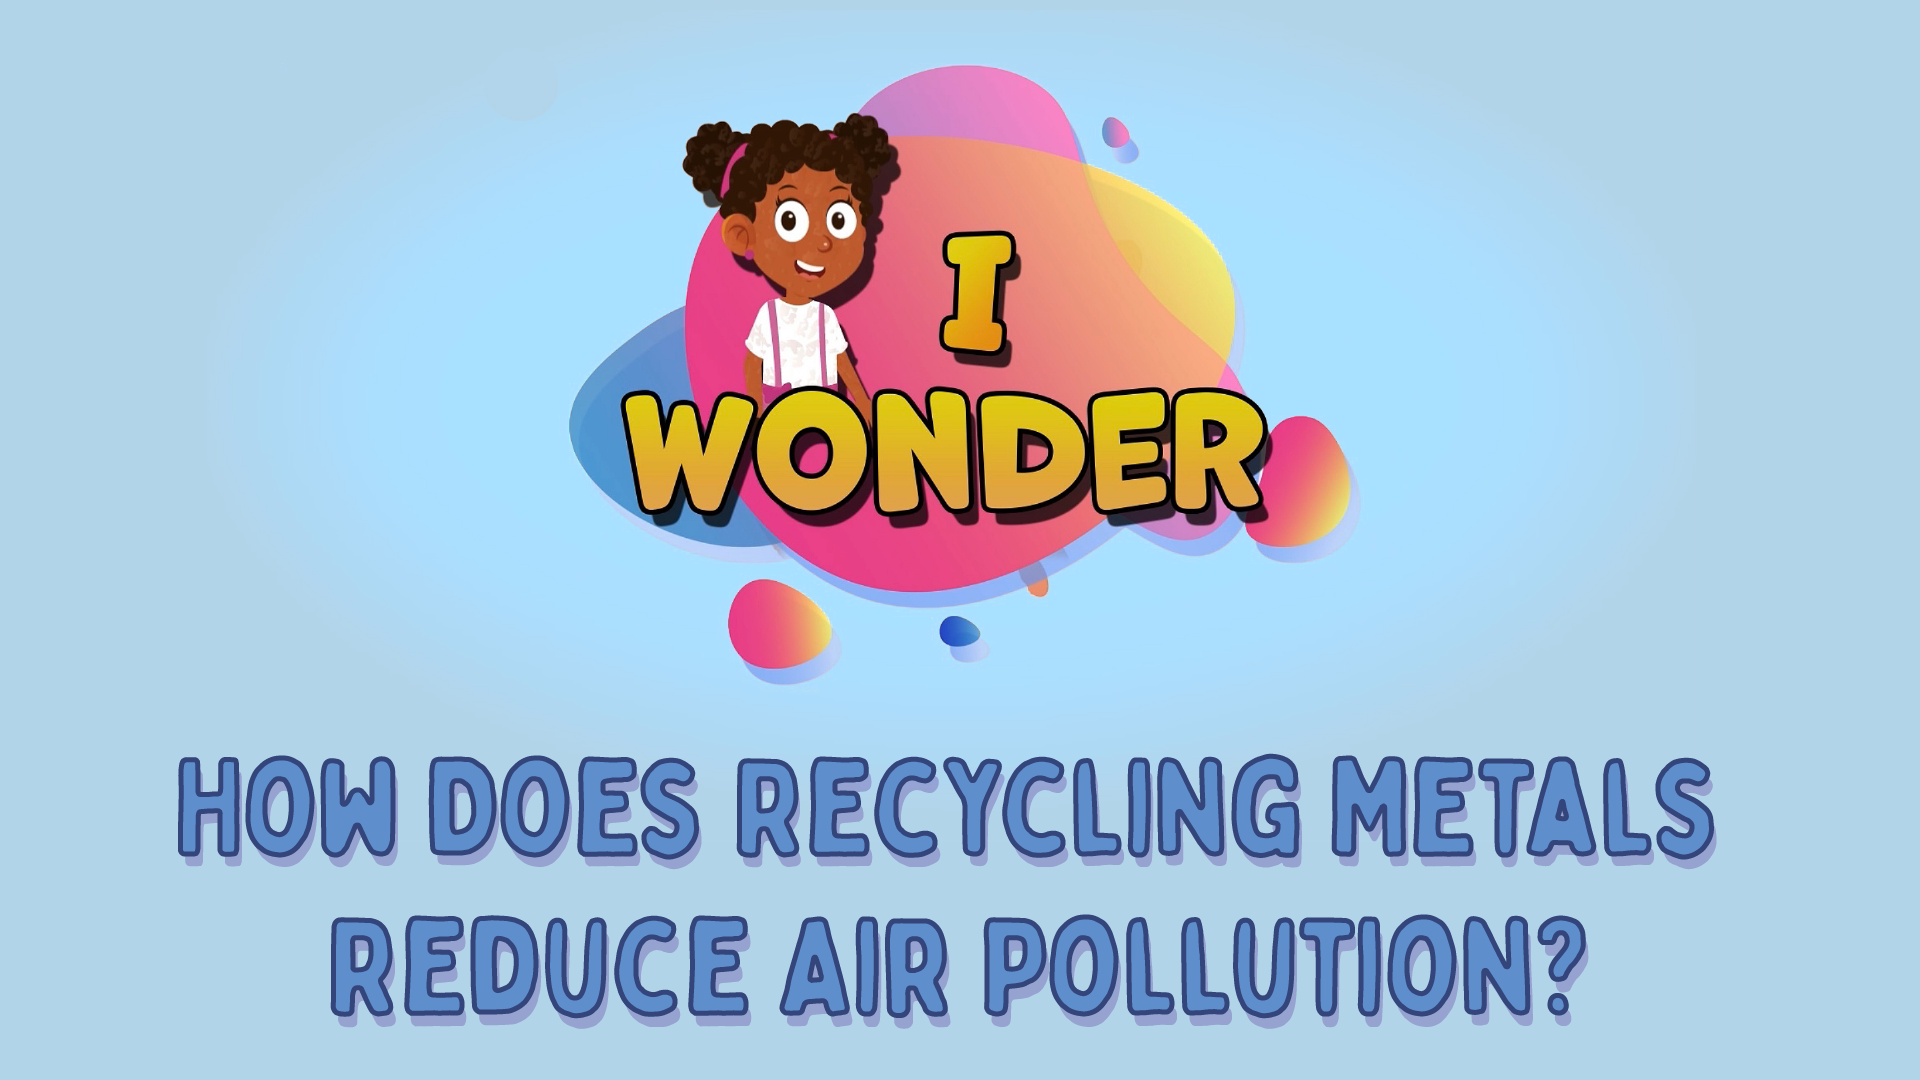 How Does Recycling Metals Reduce Air Pollution?